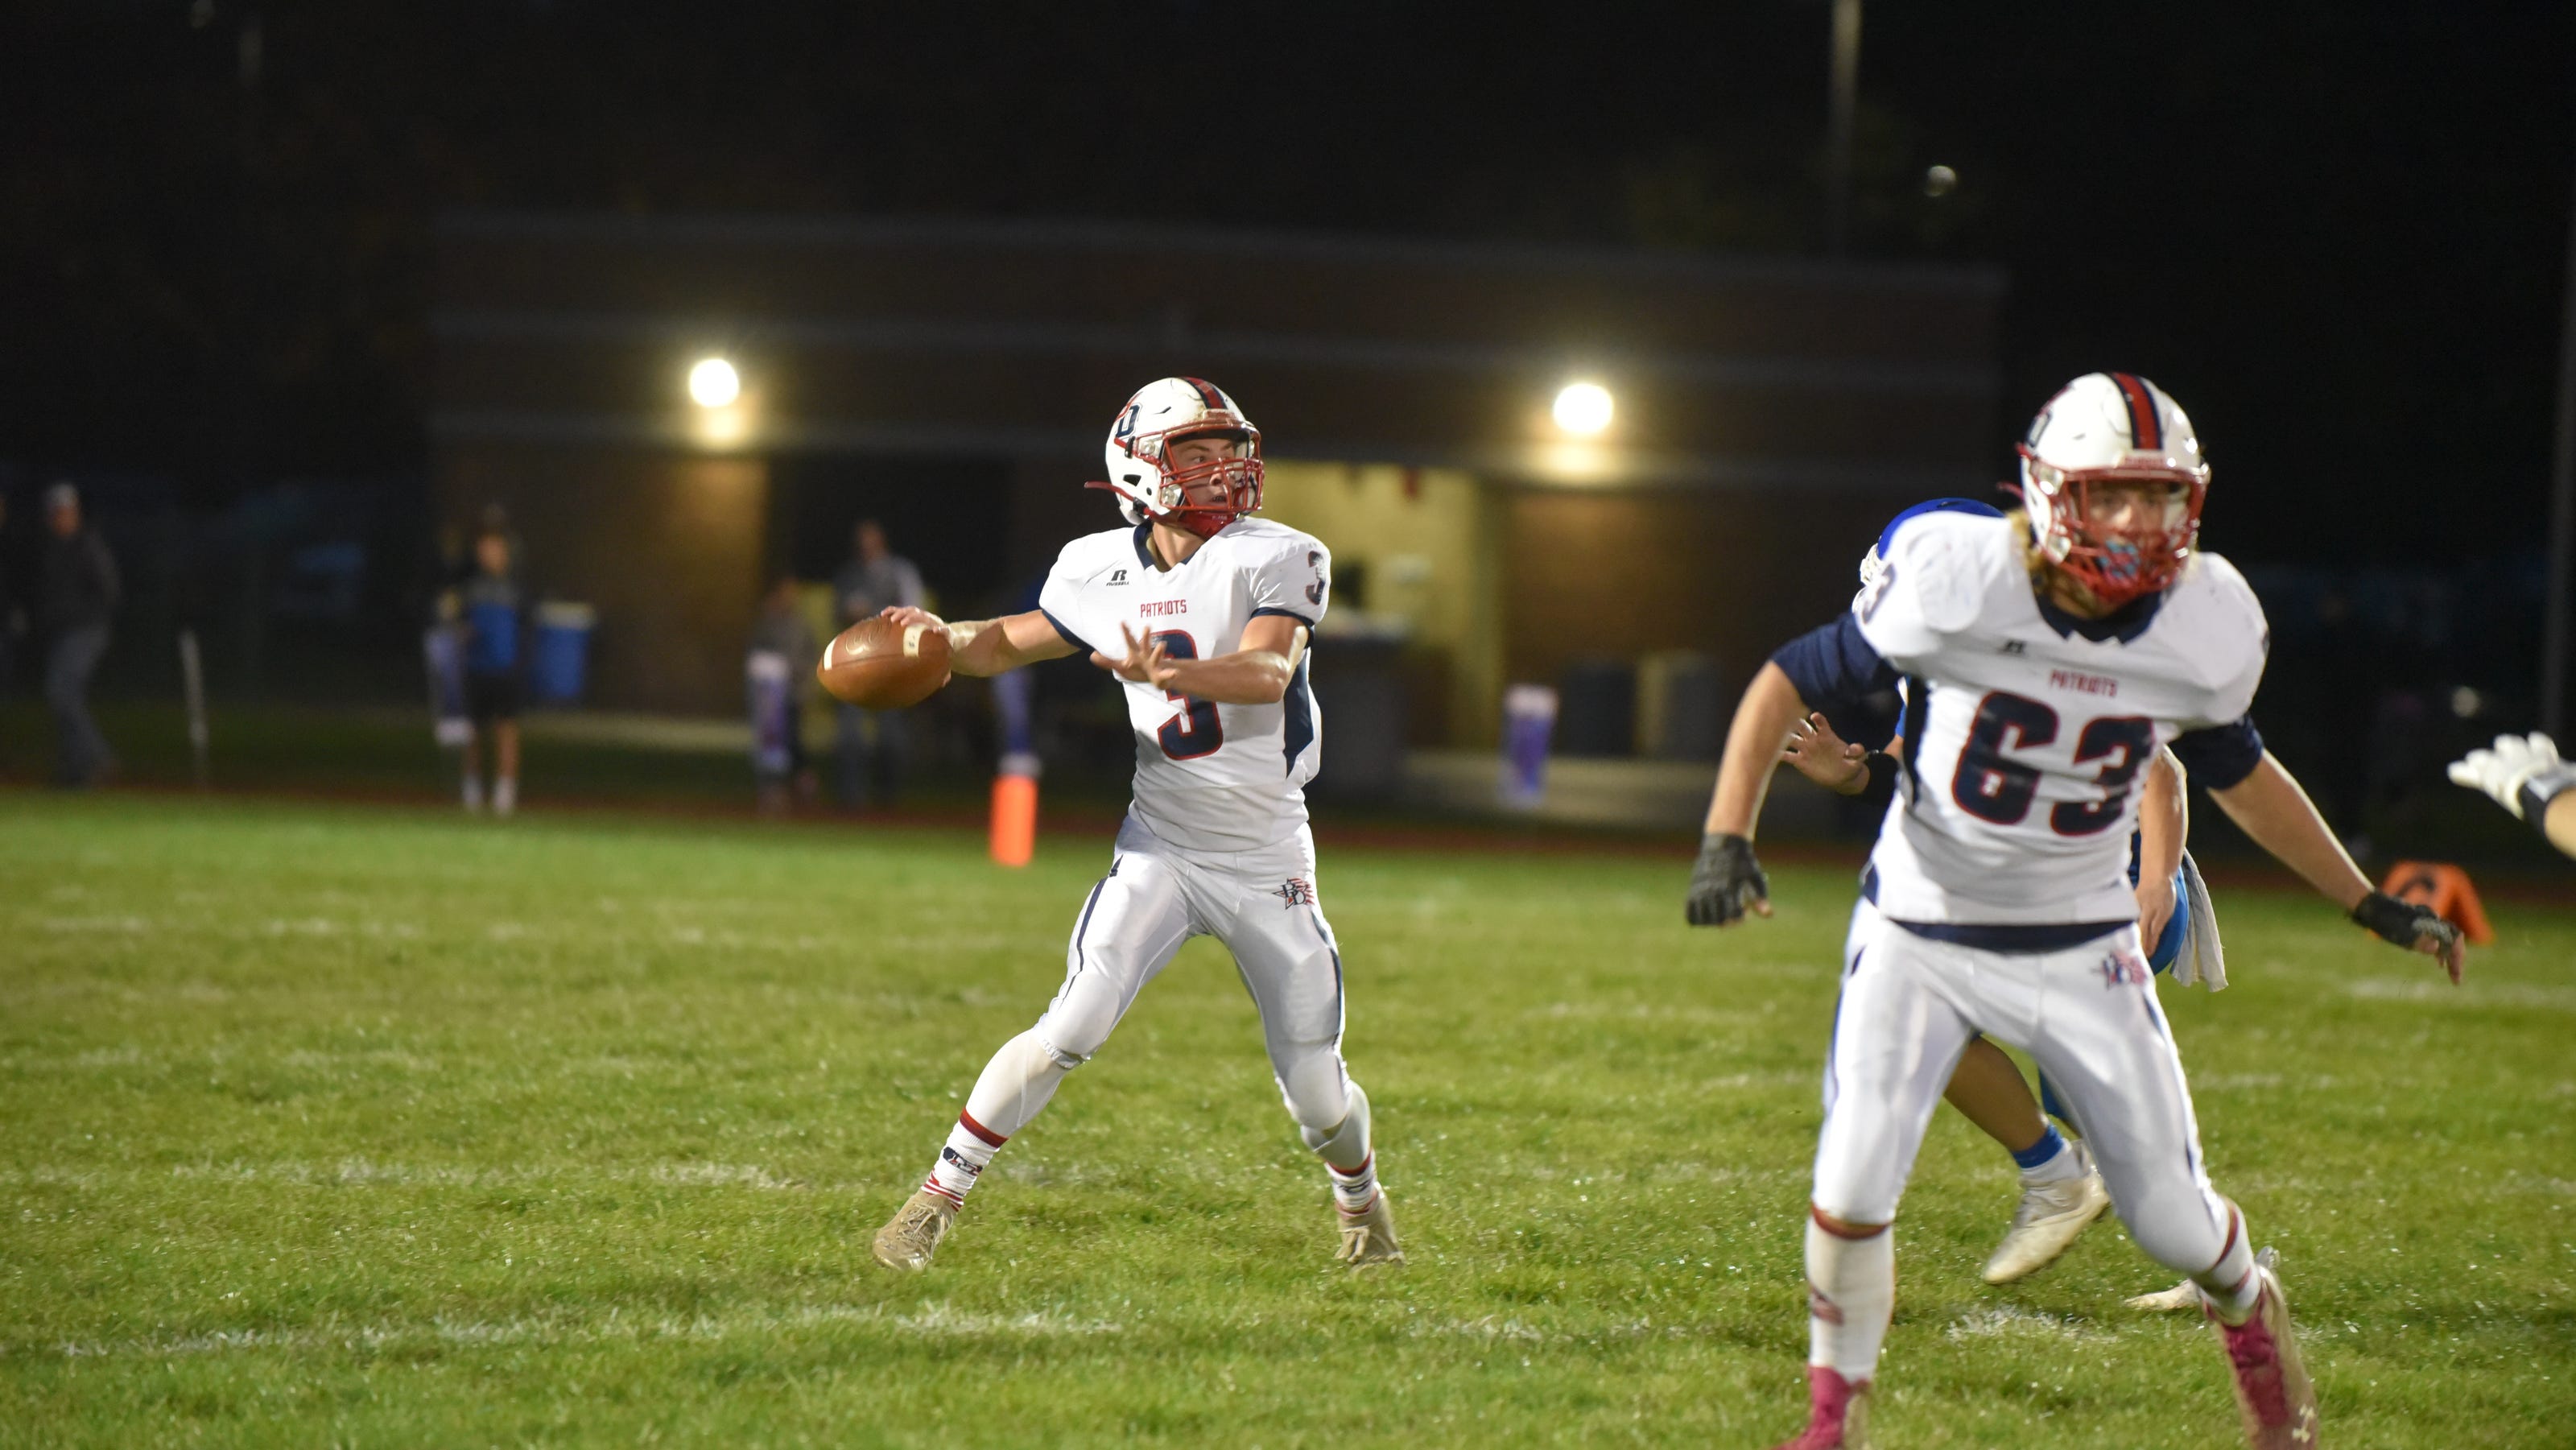  Britton Deerfield's Johnson named Lenawee County Football Player of the Year 